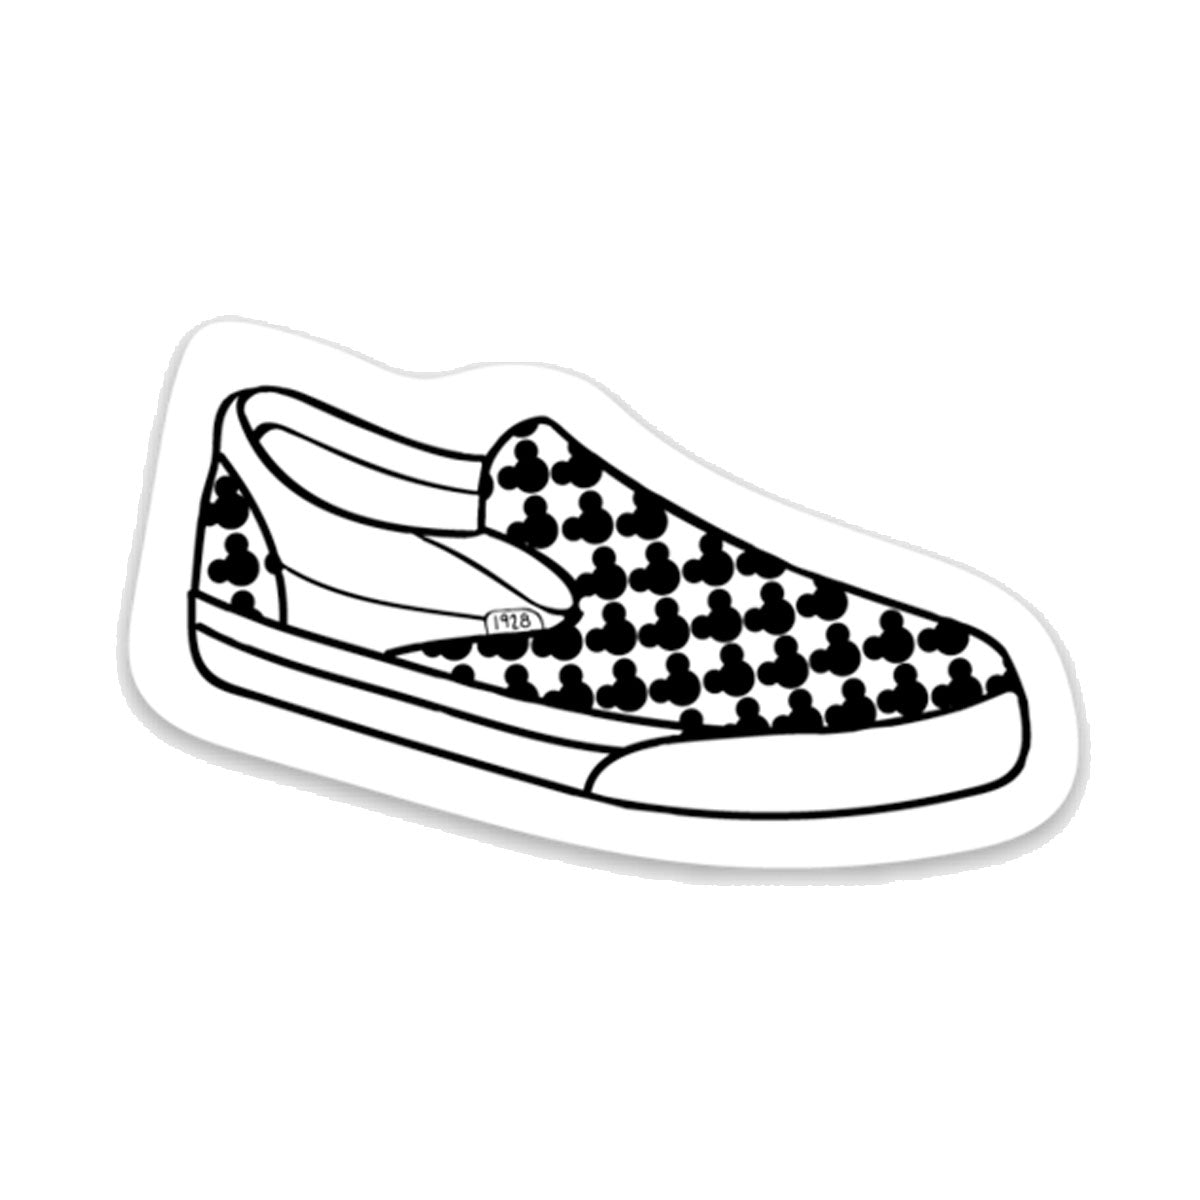 Off the Wall Vans Shoe Decal